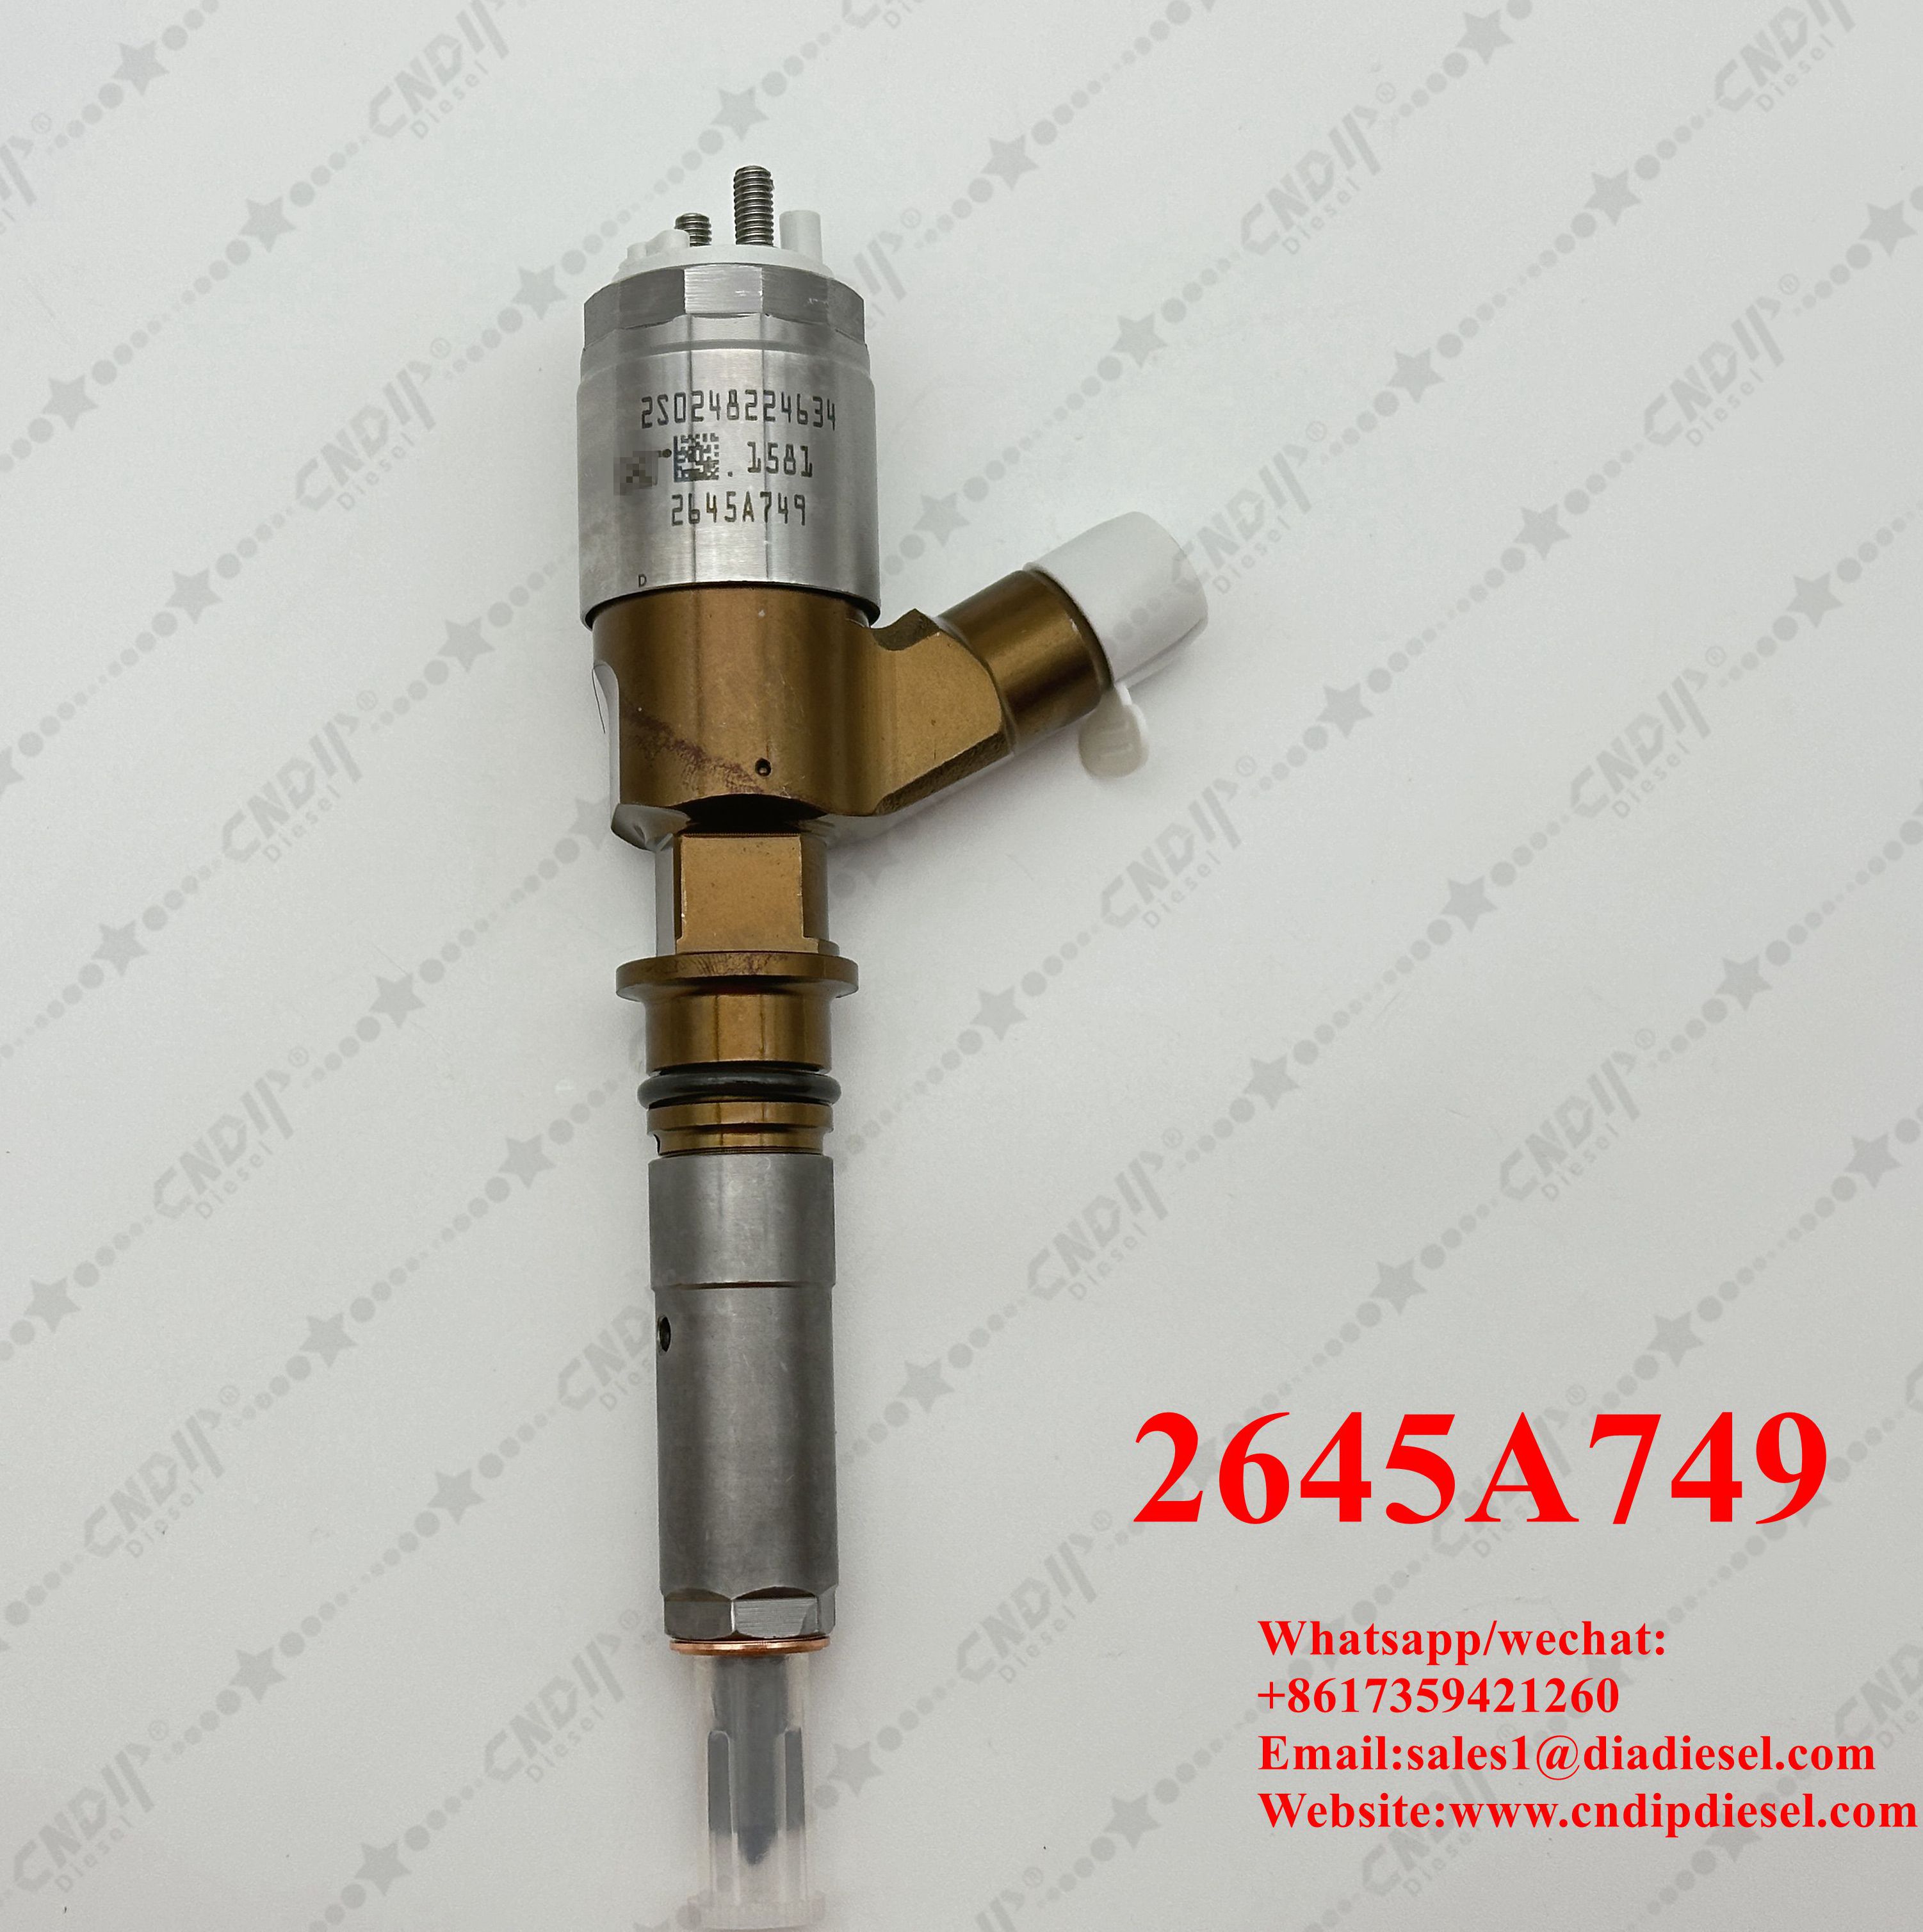 High Performance Diesel Fuel Perkins Injector 2645A749 Injector 320-0690 for Caterpillar C6.6 Engine